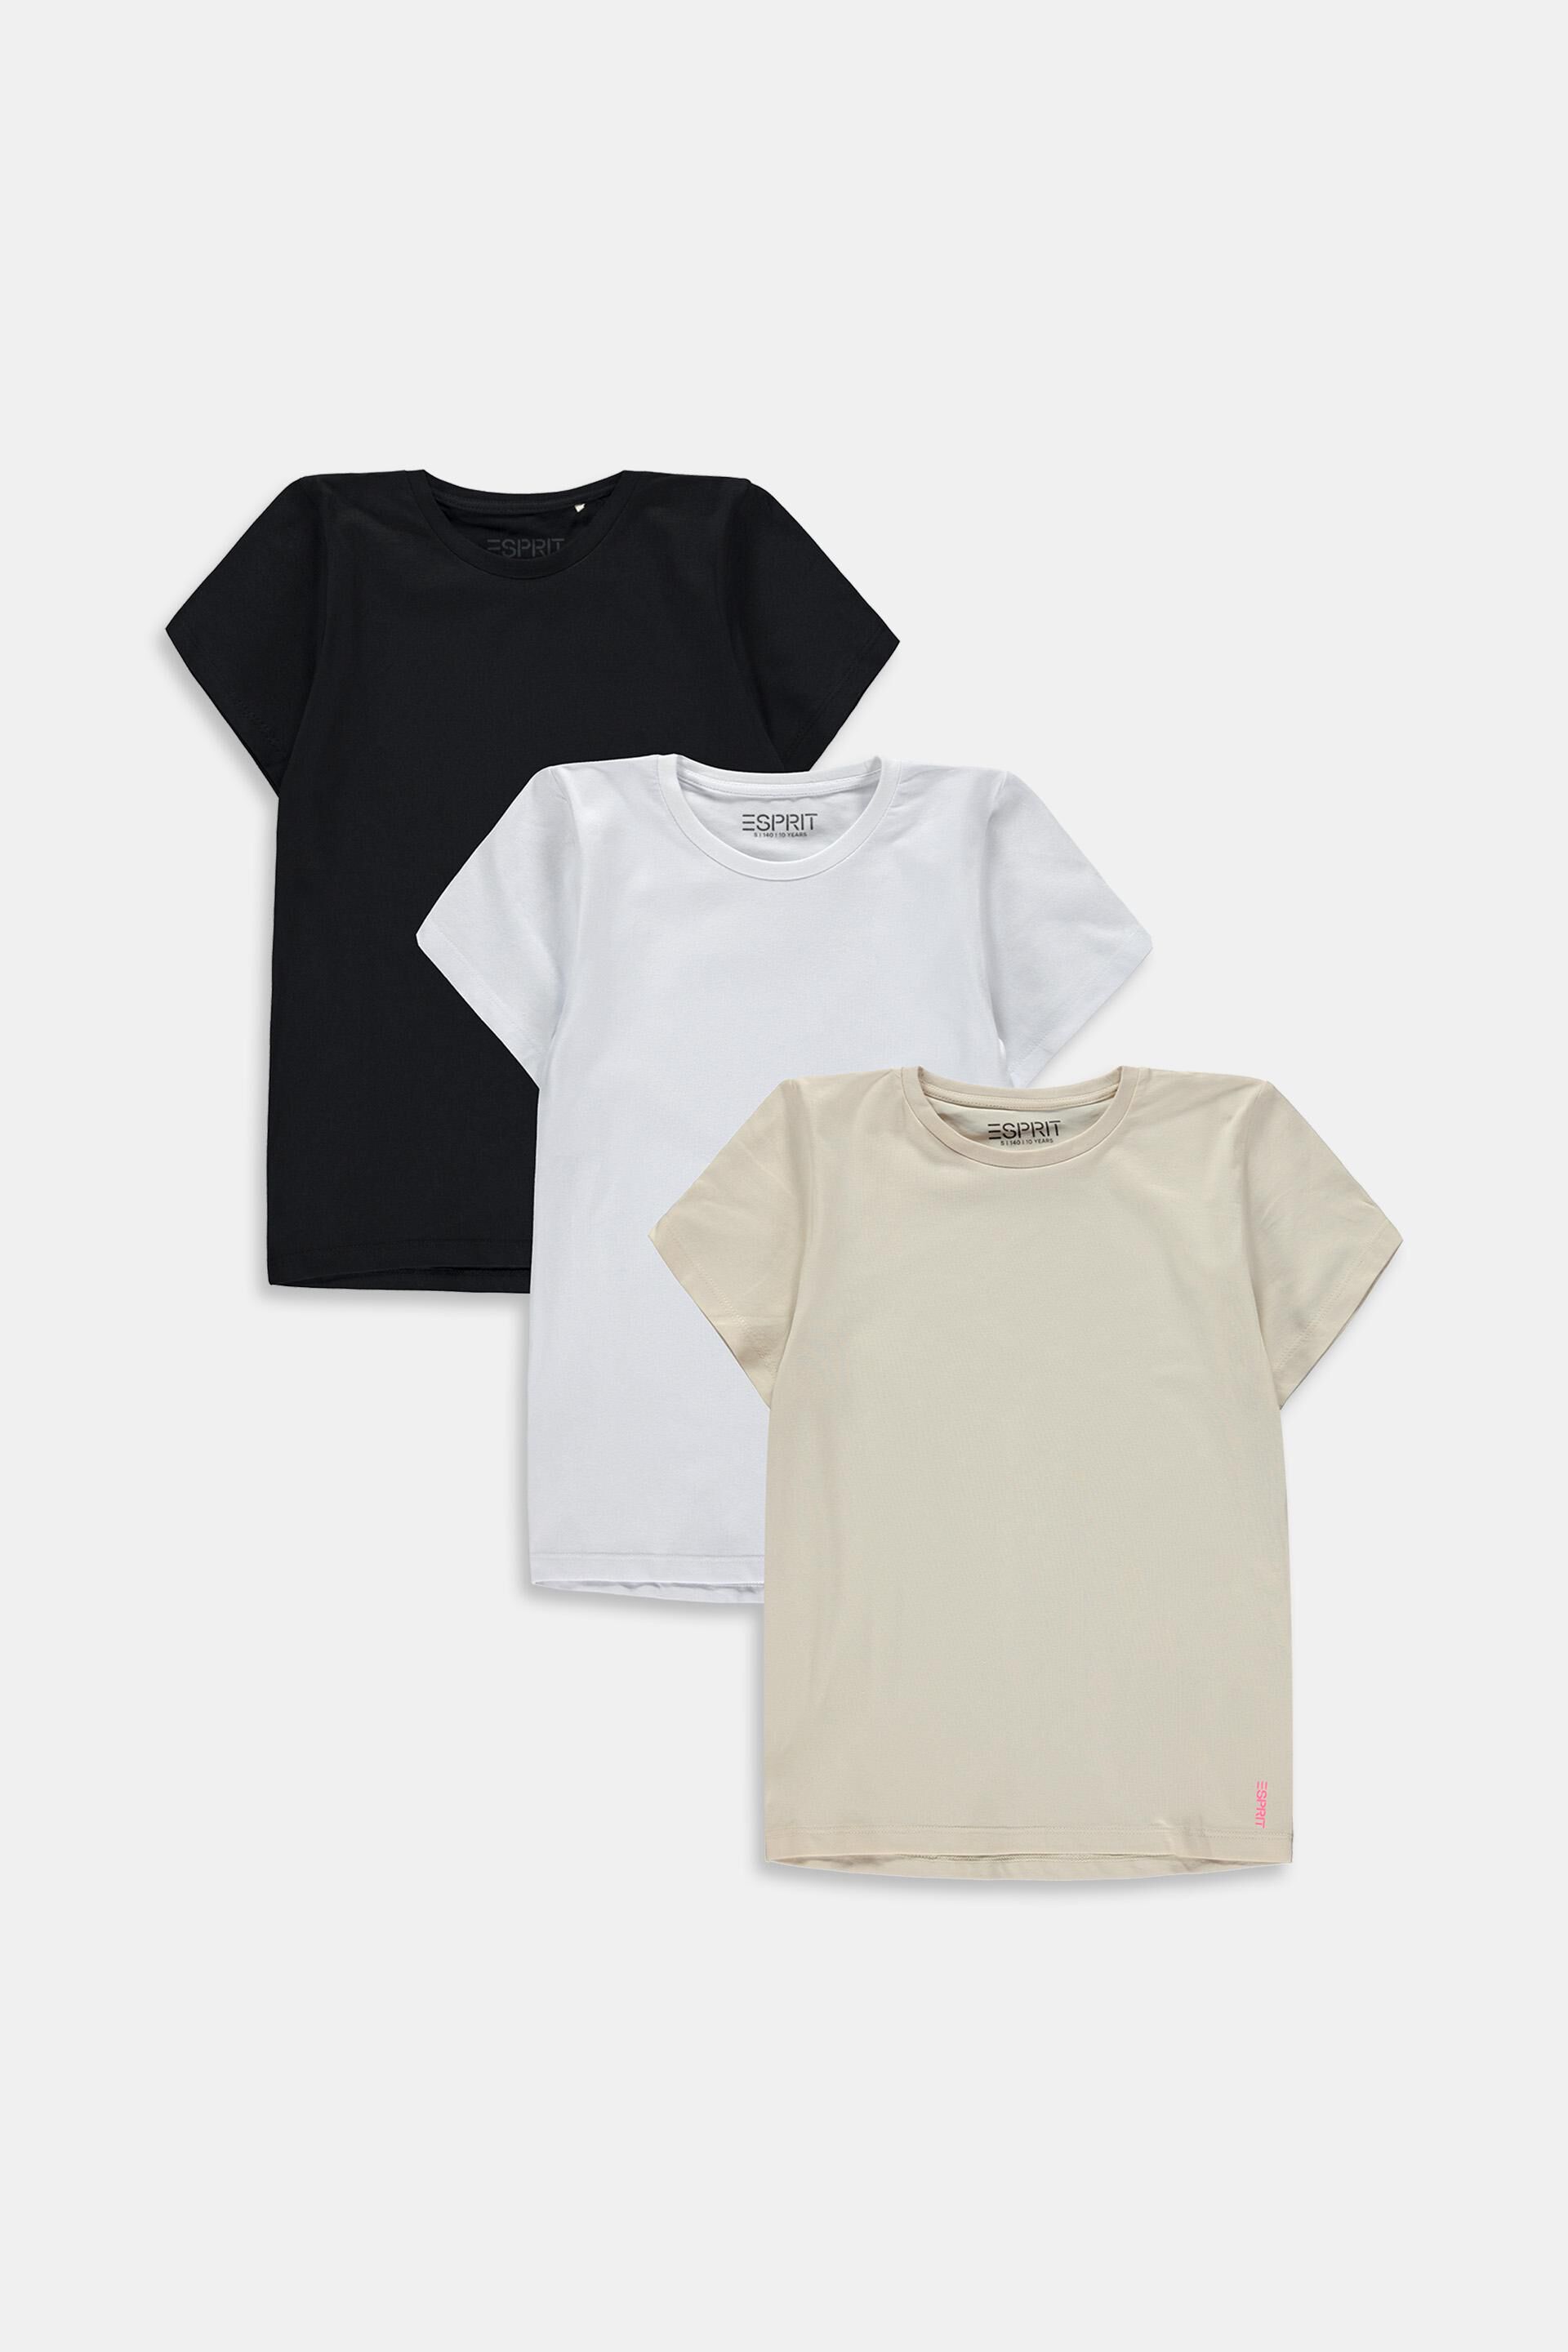 Esprit t-shirts of 3-pack